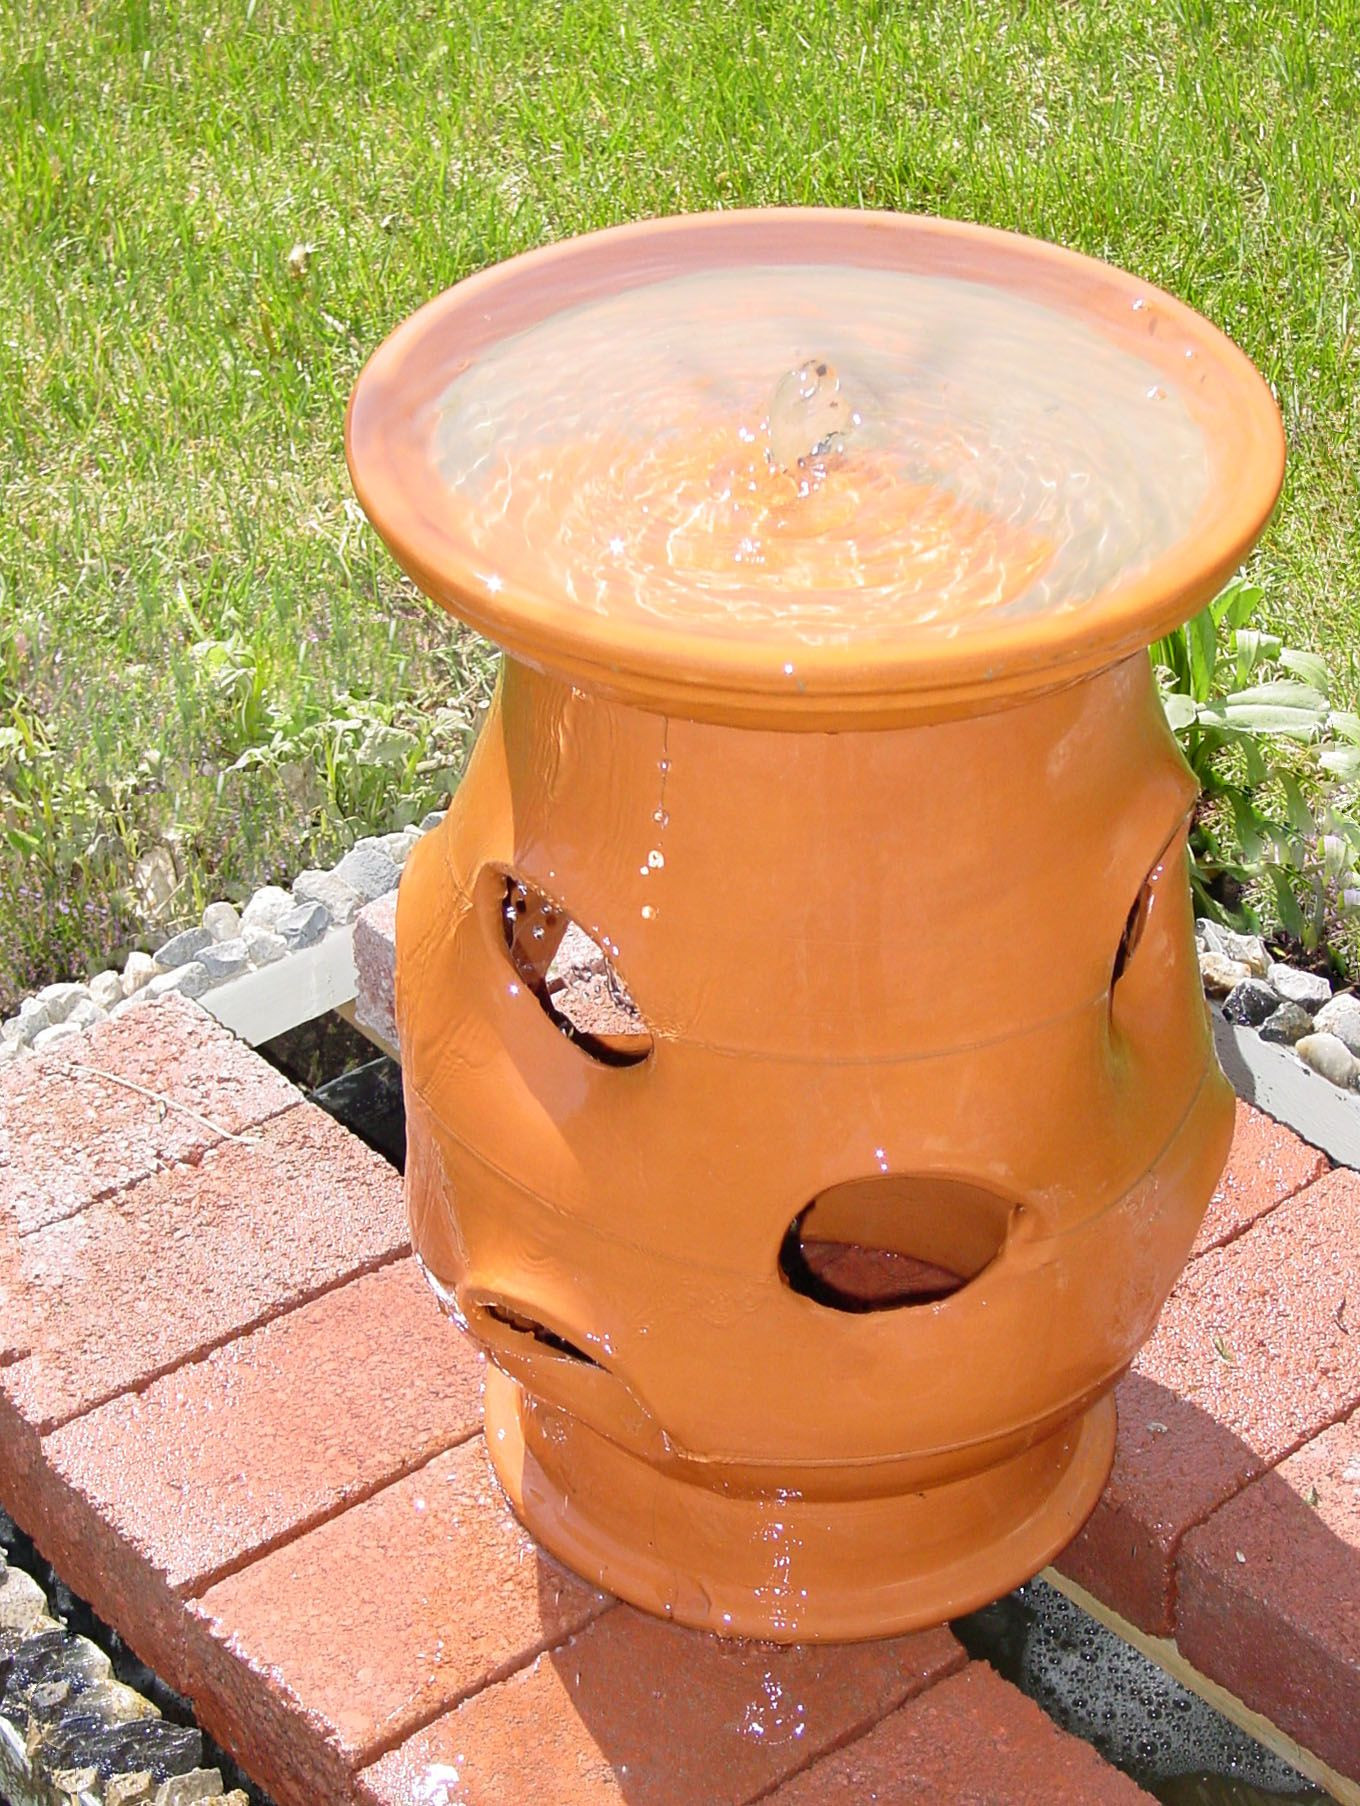 how to build a vase water fountain of how to make a strawberry pot garden water fountain diy ideas for how to make a strawberry pot garden water fountain diy garden projects garden yard ideas